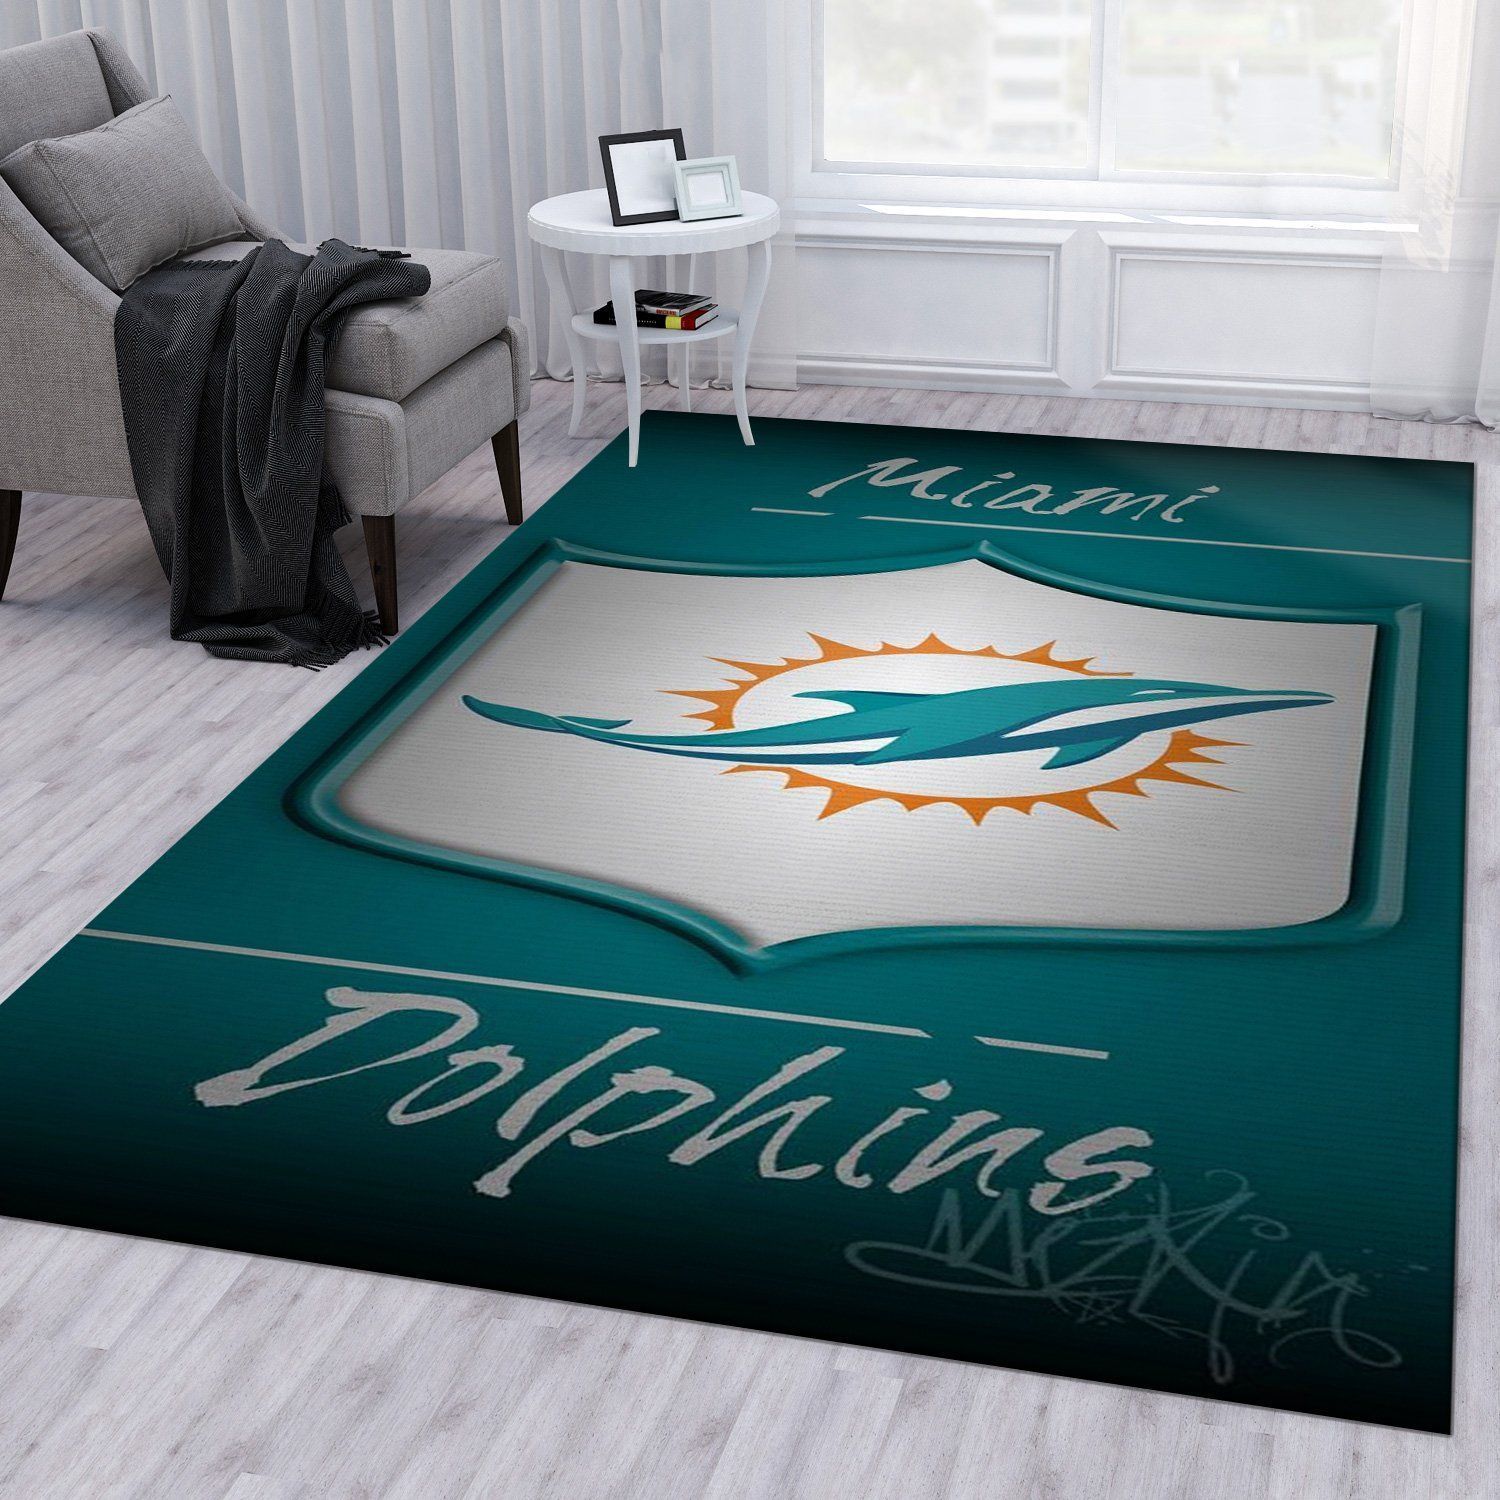 Miami Dolphins 5 NFL Area Rug For Christmas Living Room Rug Home Decor Floor Decor - Indoor Outdoor Rugs